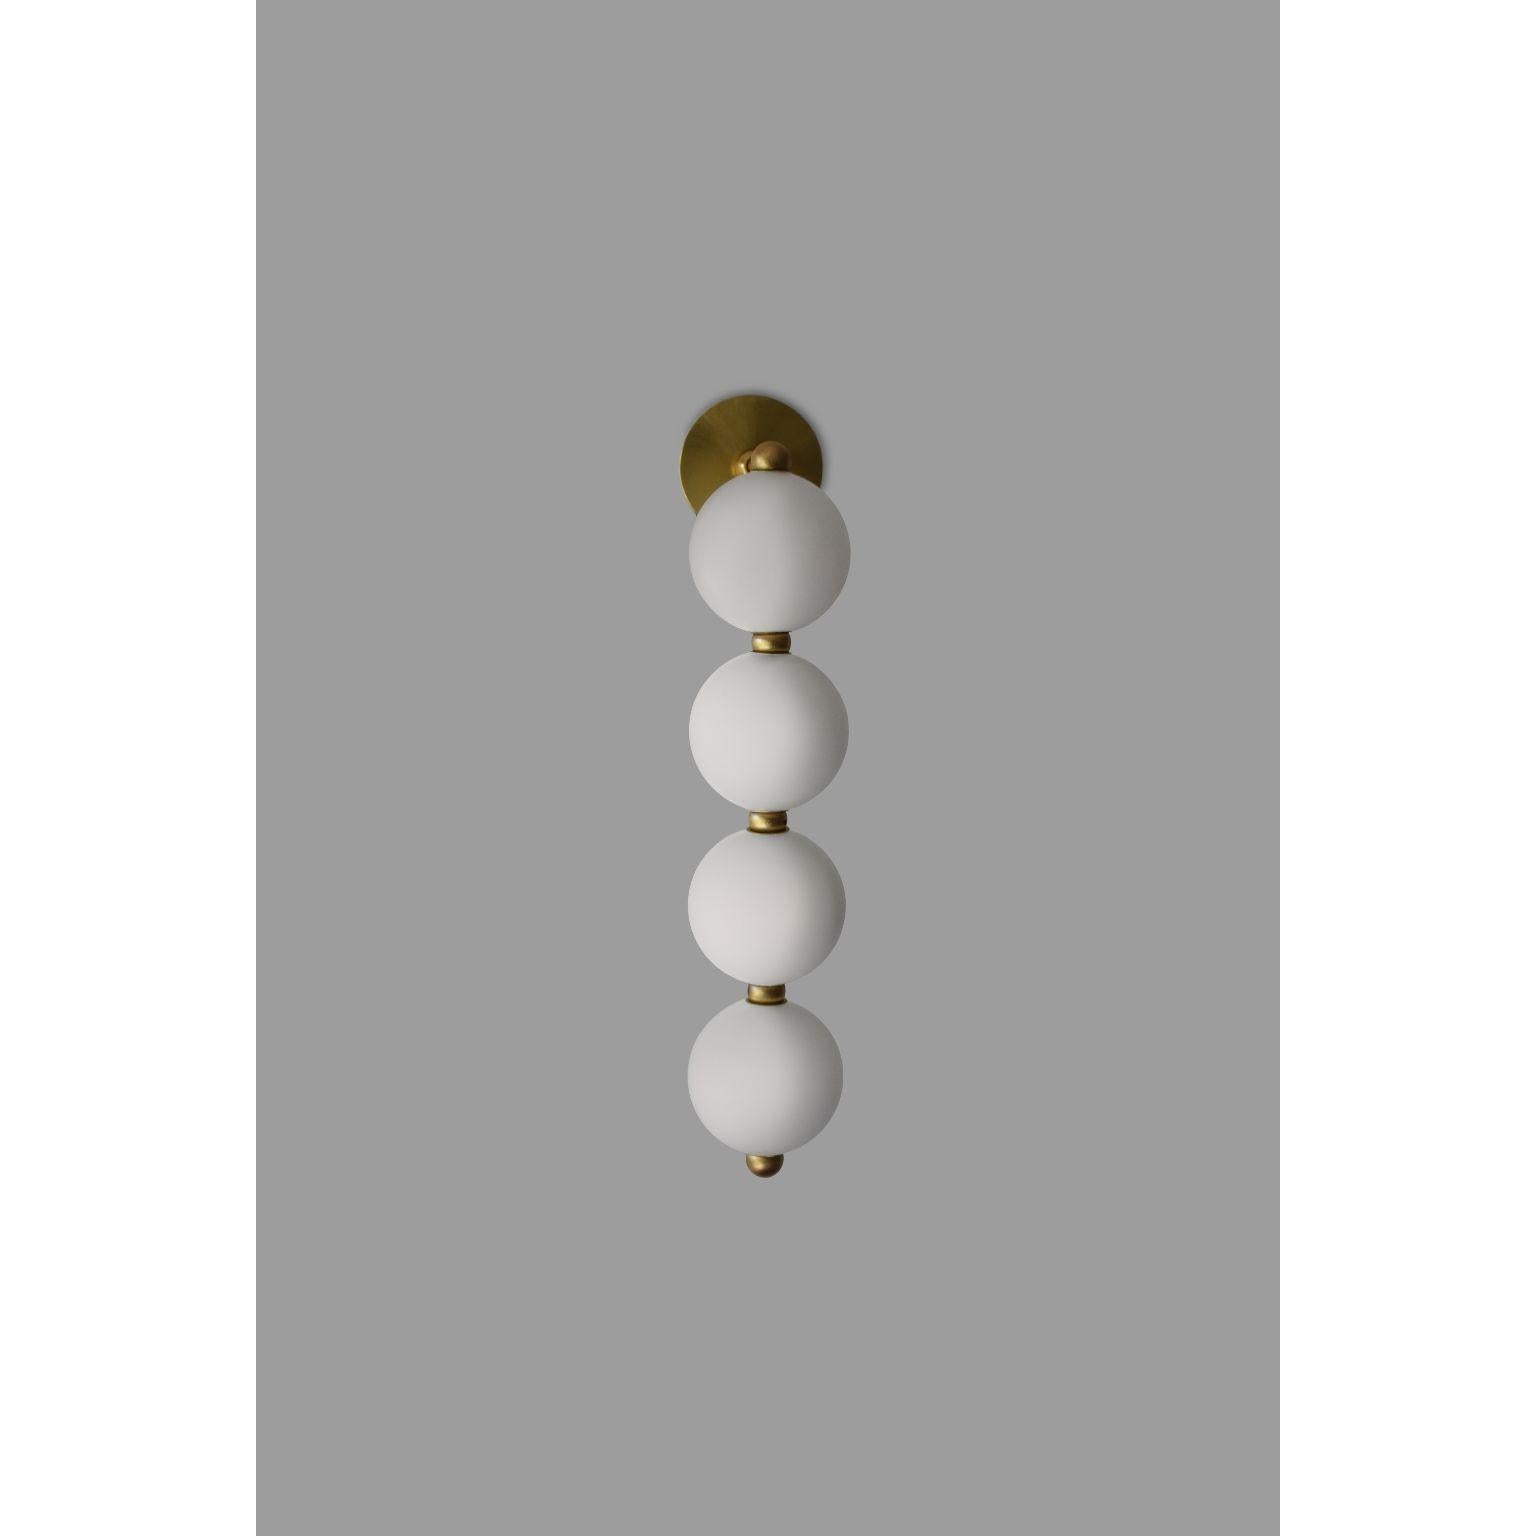 Contemporary Perls Earing Wall Light by Ludovic Clément D’armont